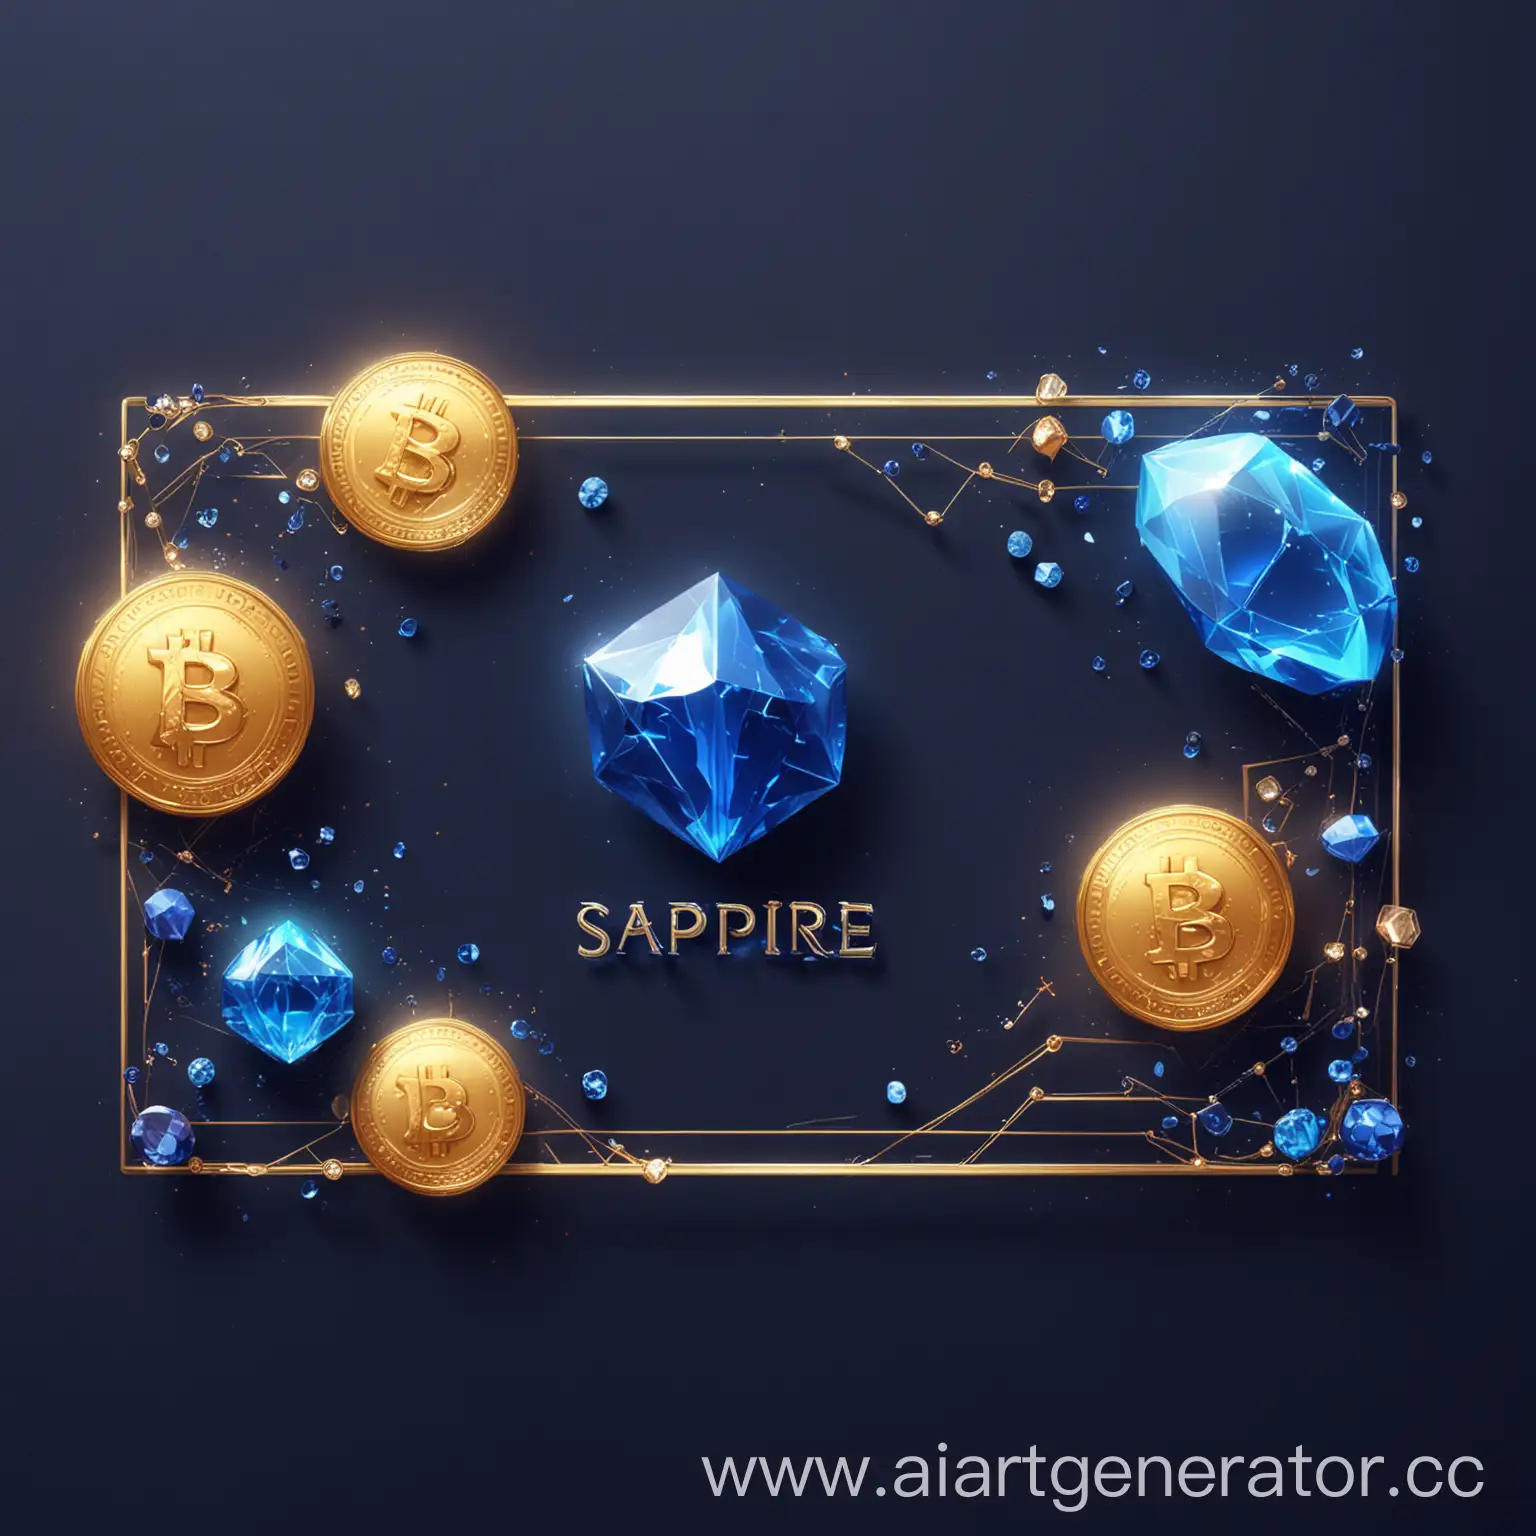 Sapphire-Skyline-Background-for-Crypto-Exchange-Site-with-Sapphires